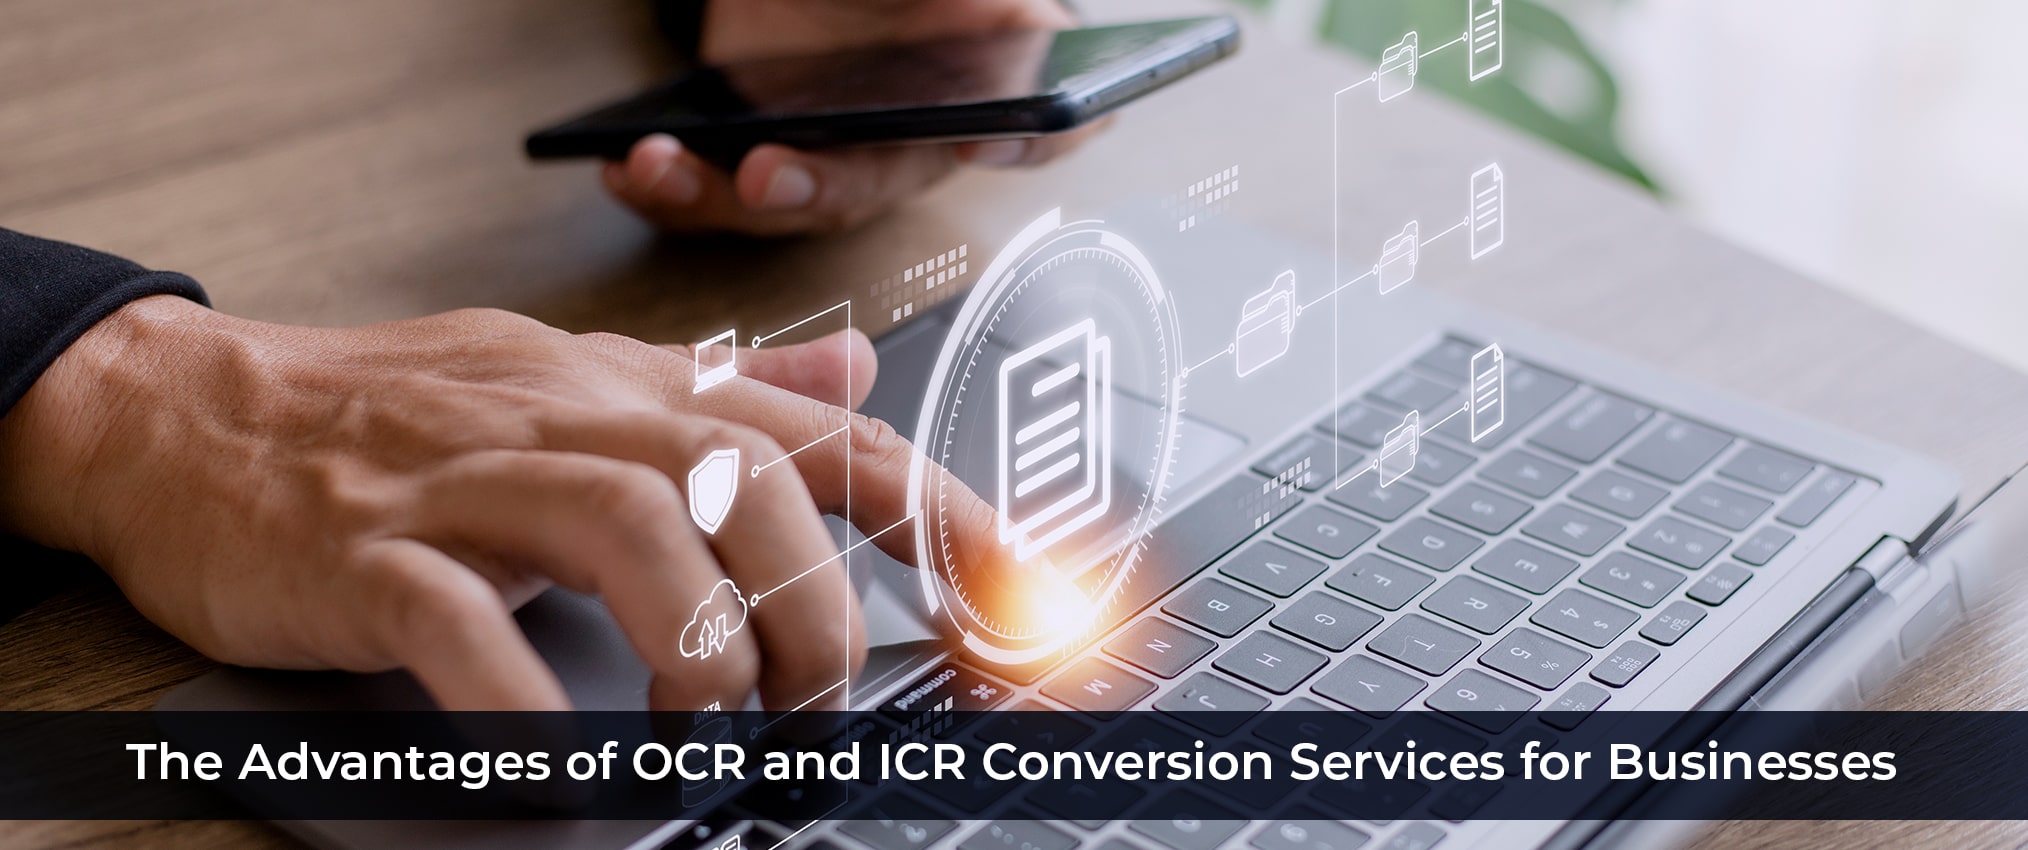 OCR and ICR Conversion